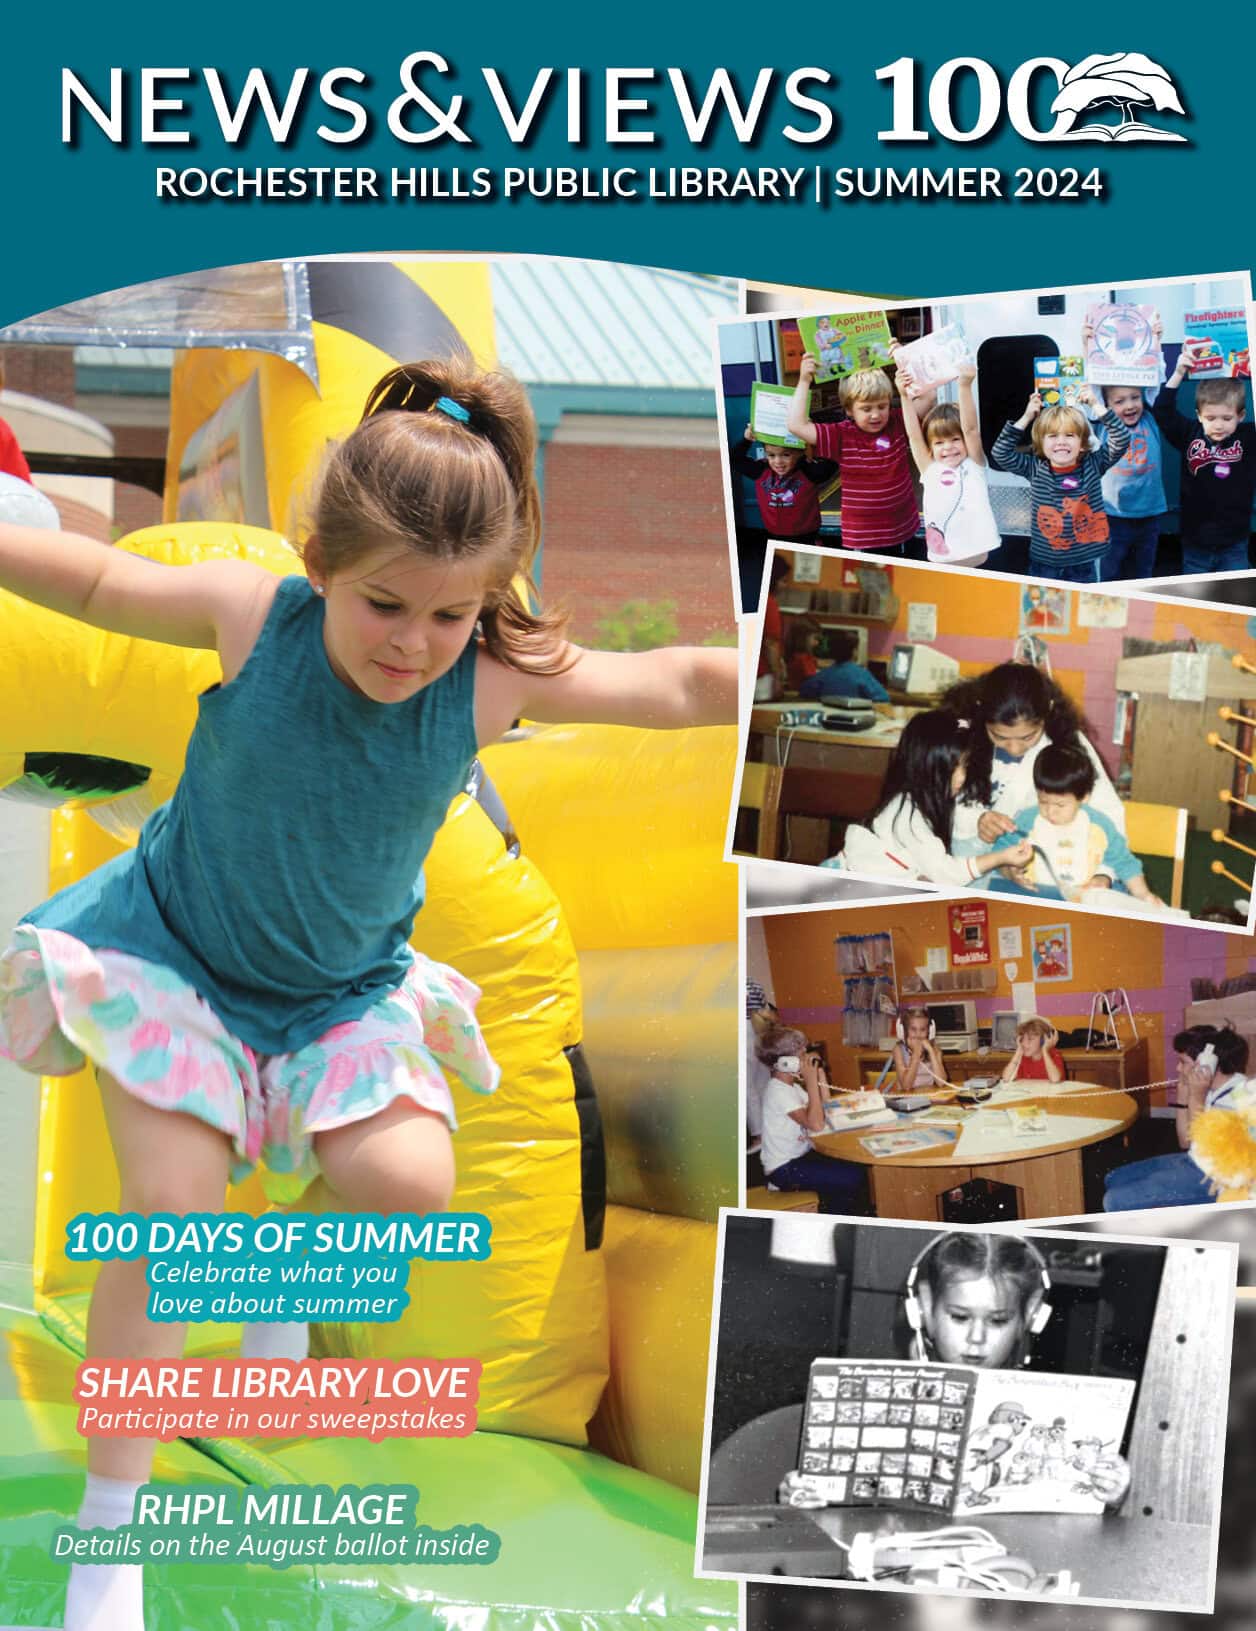 News and Views Summer 2024 cover. Shows girl climbing bounce house with a collage of children in historic library photos at events in the library.